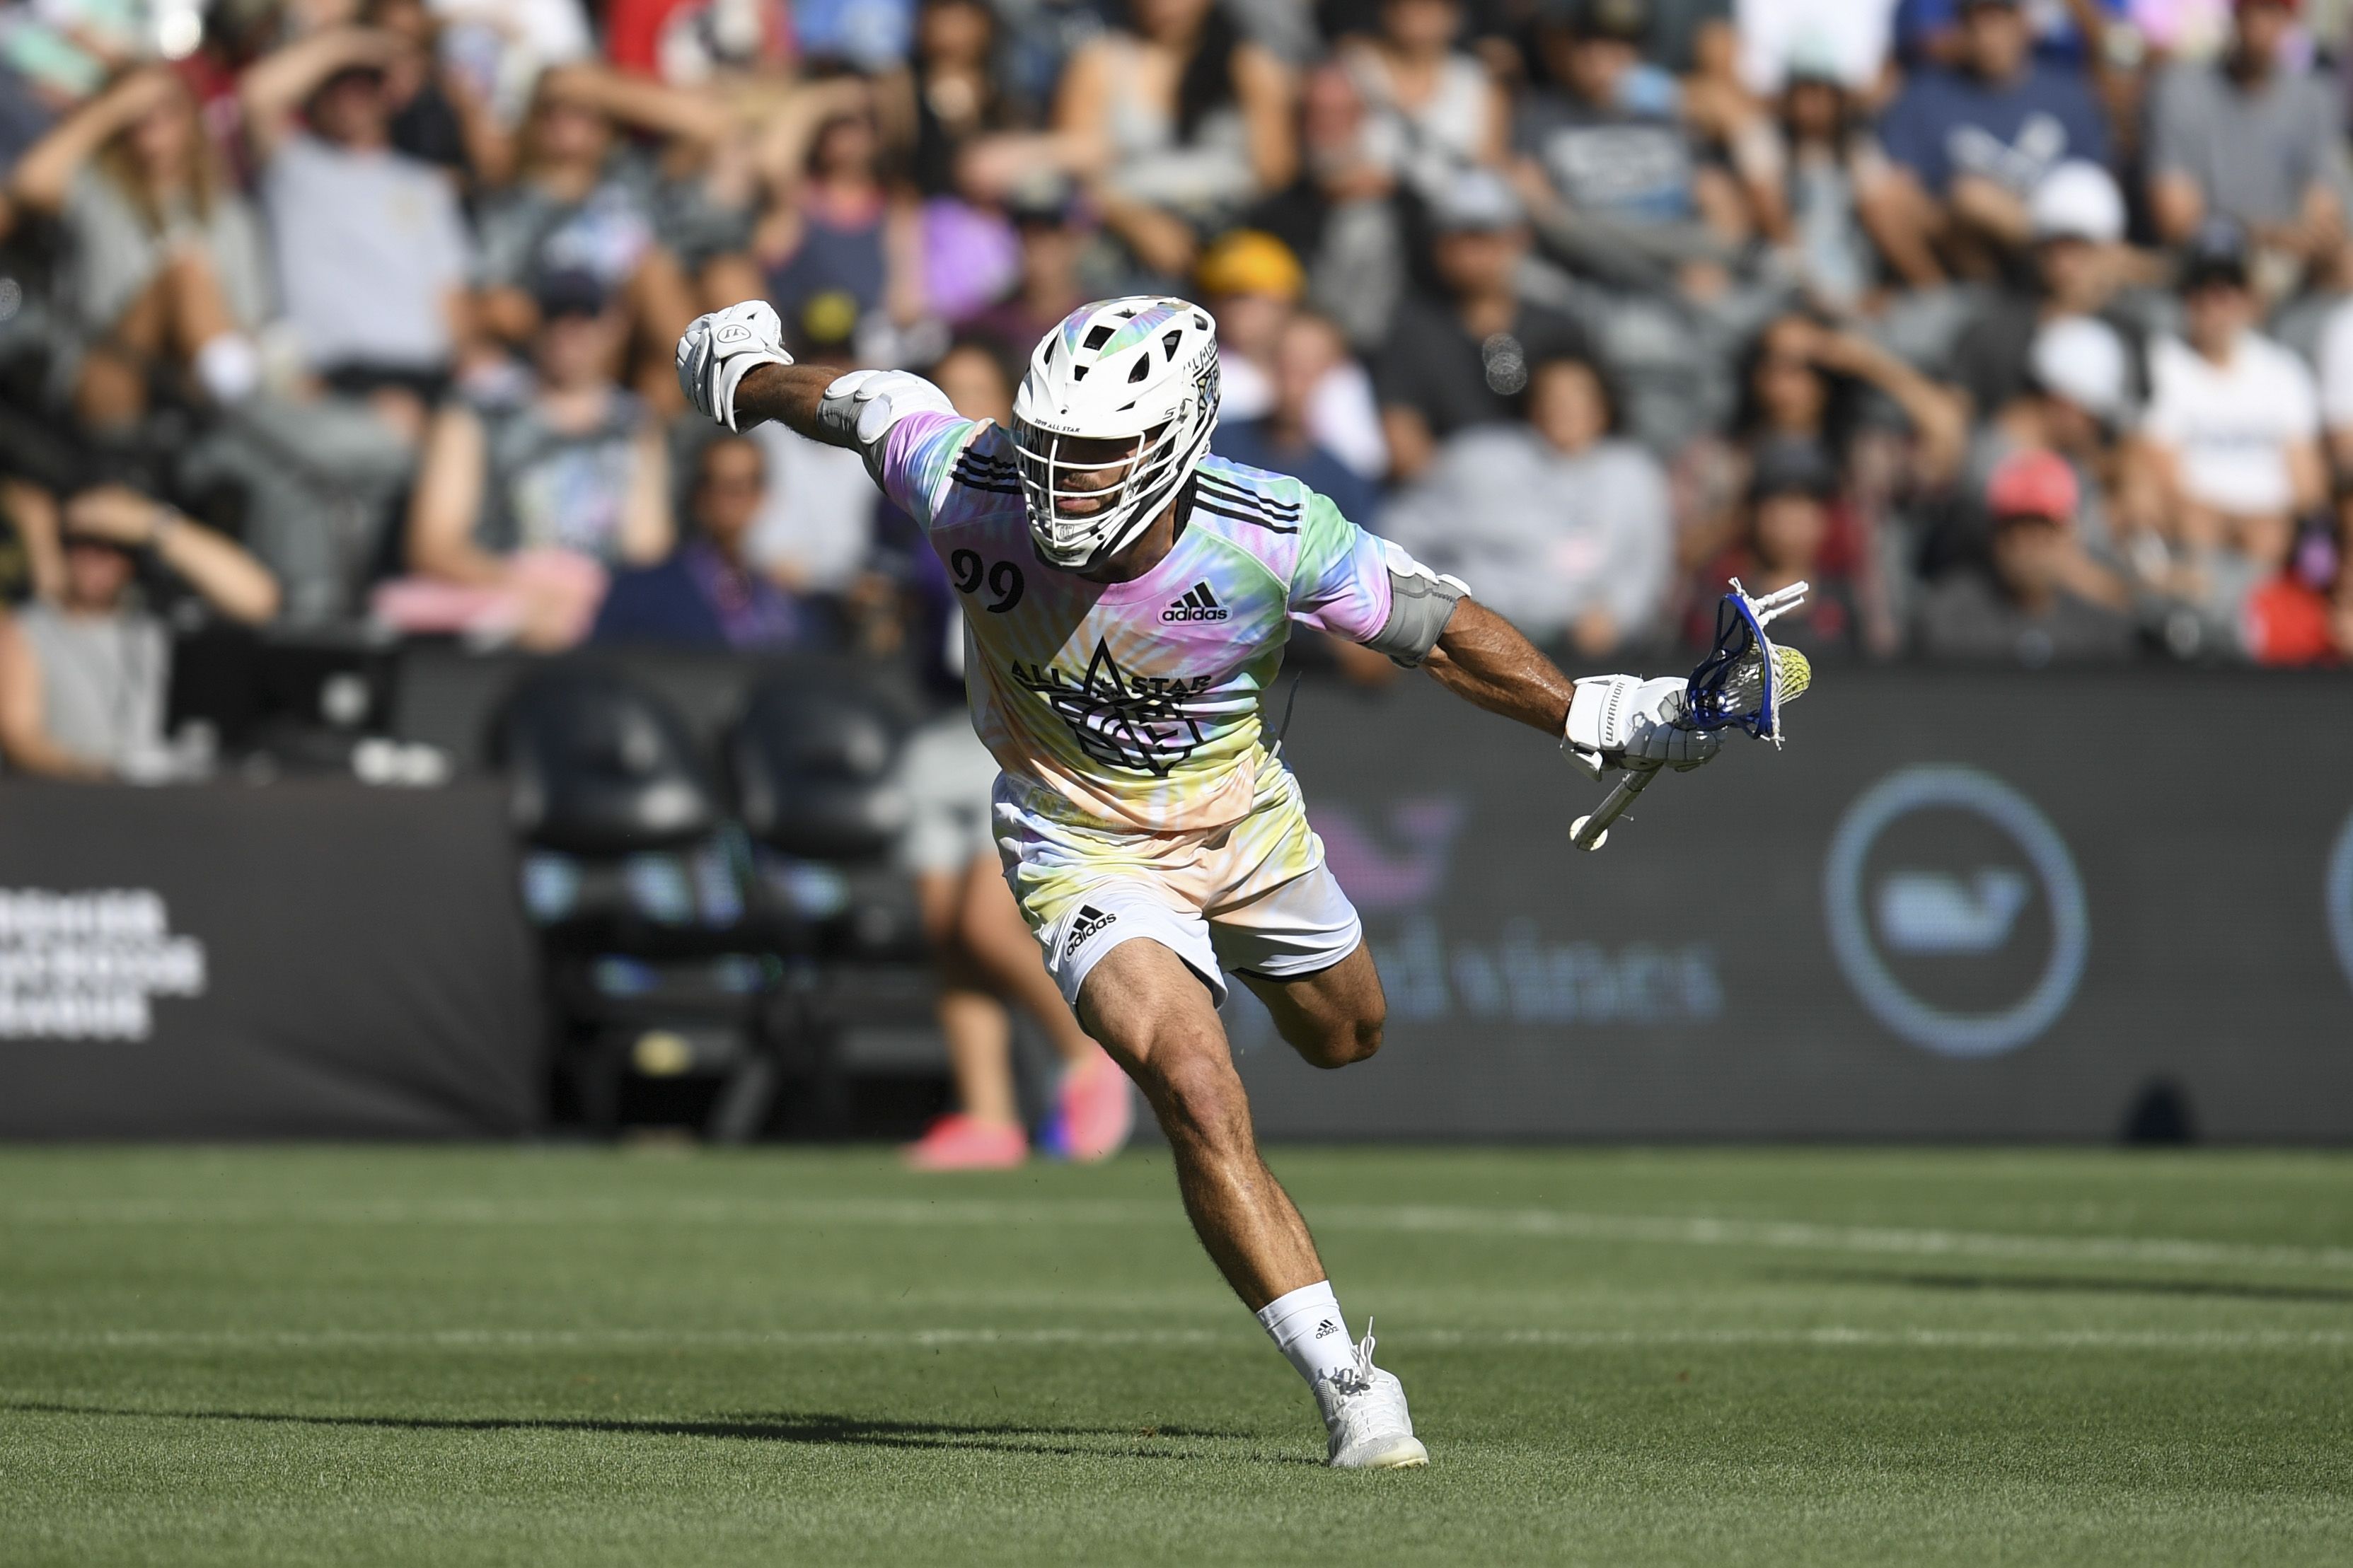 Top 5 MLL Players I NEED to See in PLL